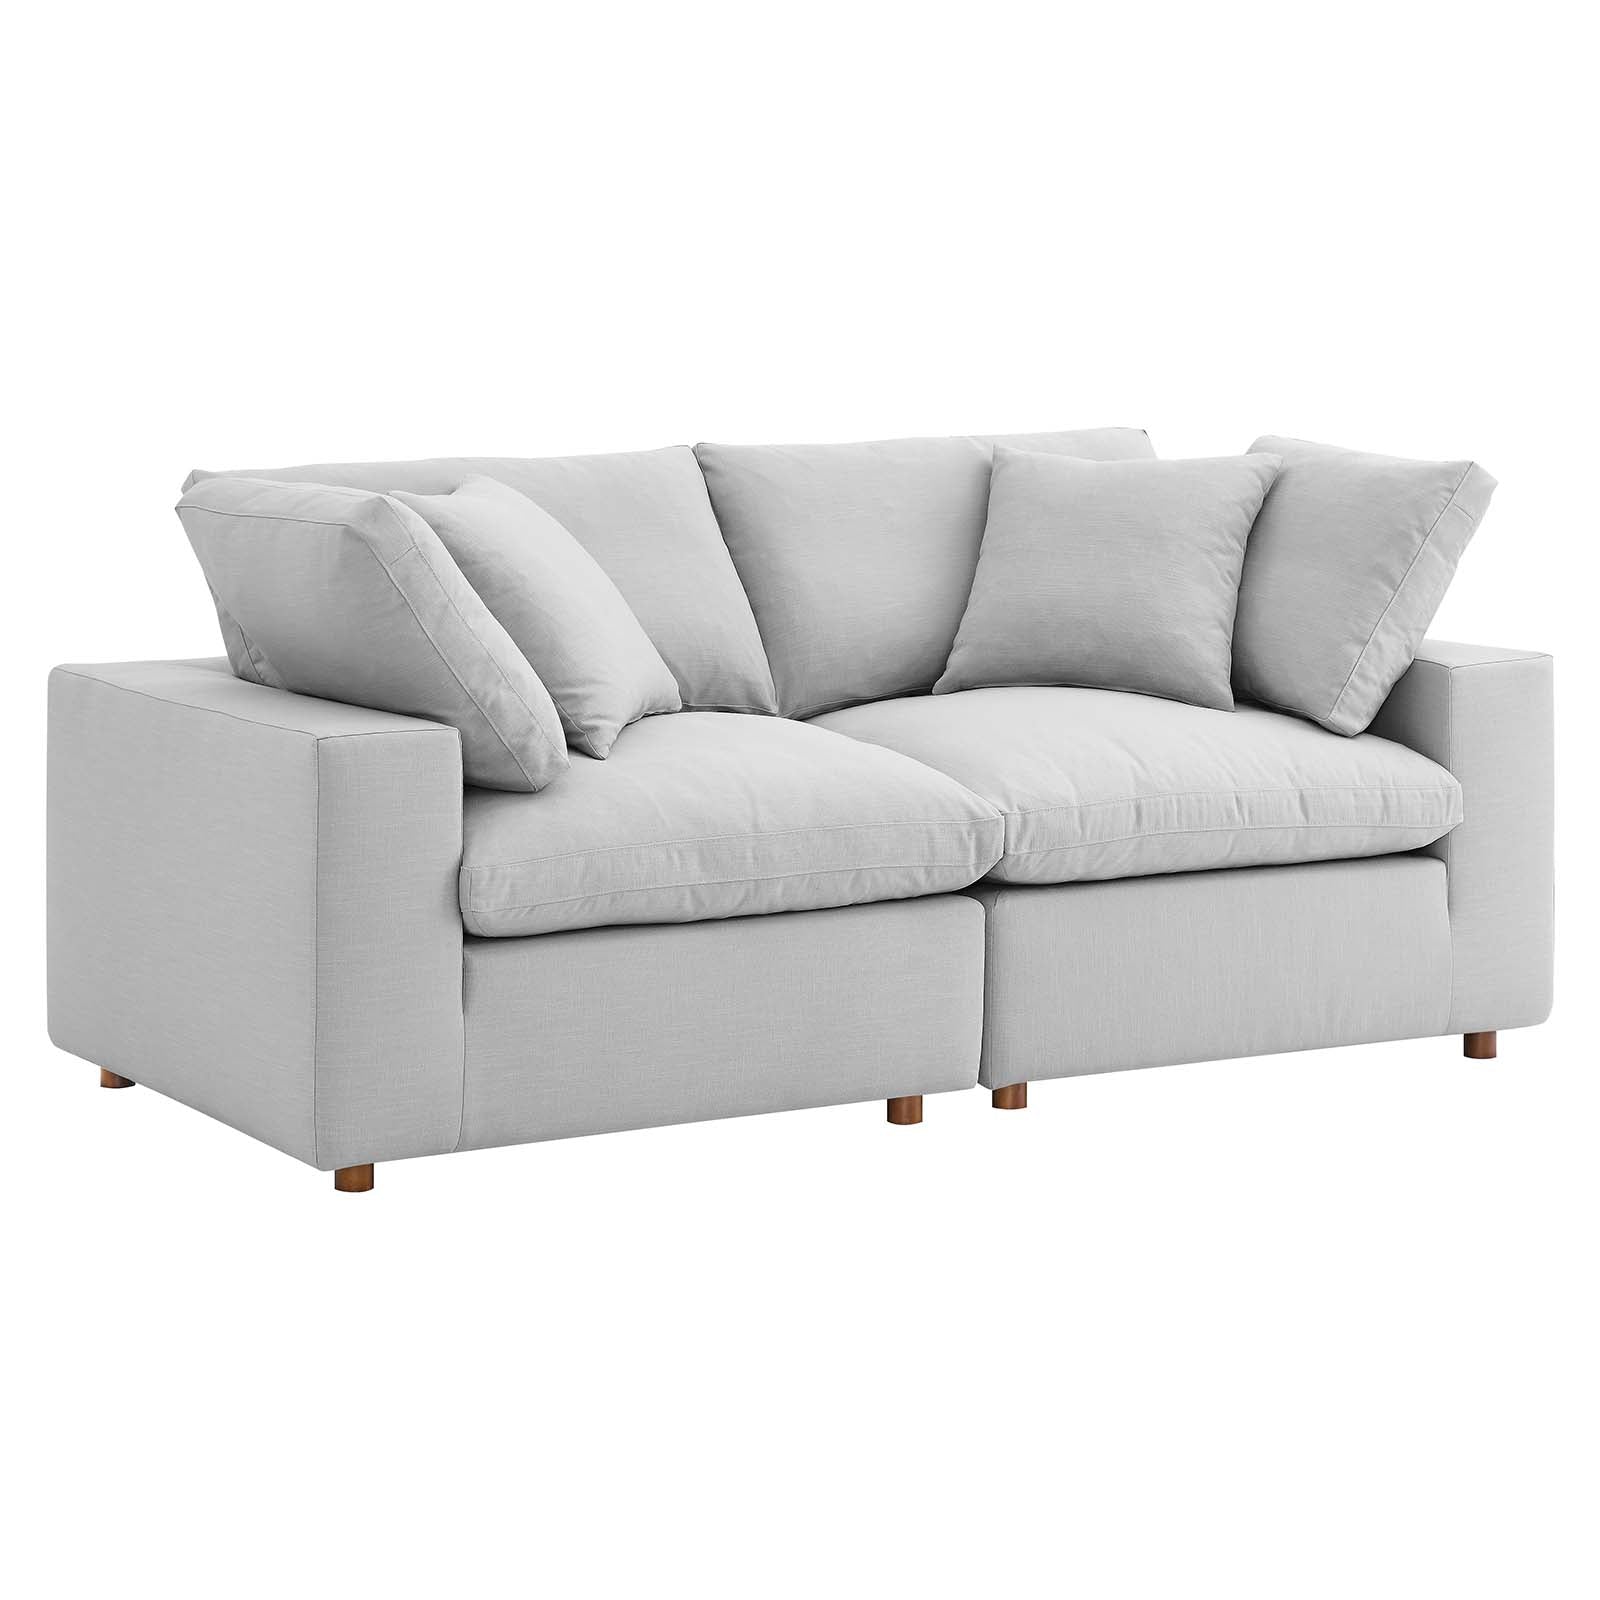 Modway Sectional Sofas - Commix Down Filled Overstuffed 2 Piece Sectional Sofa Set Light Gray